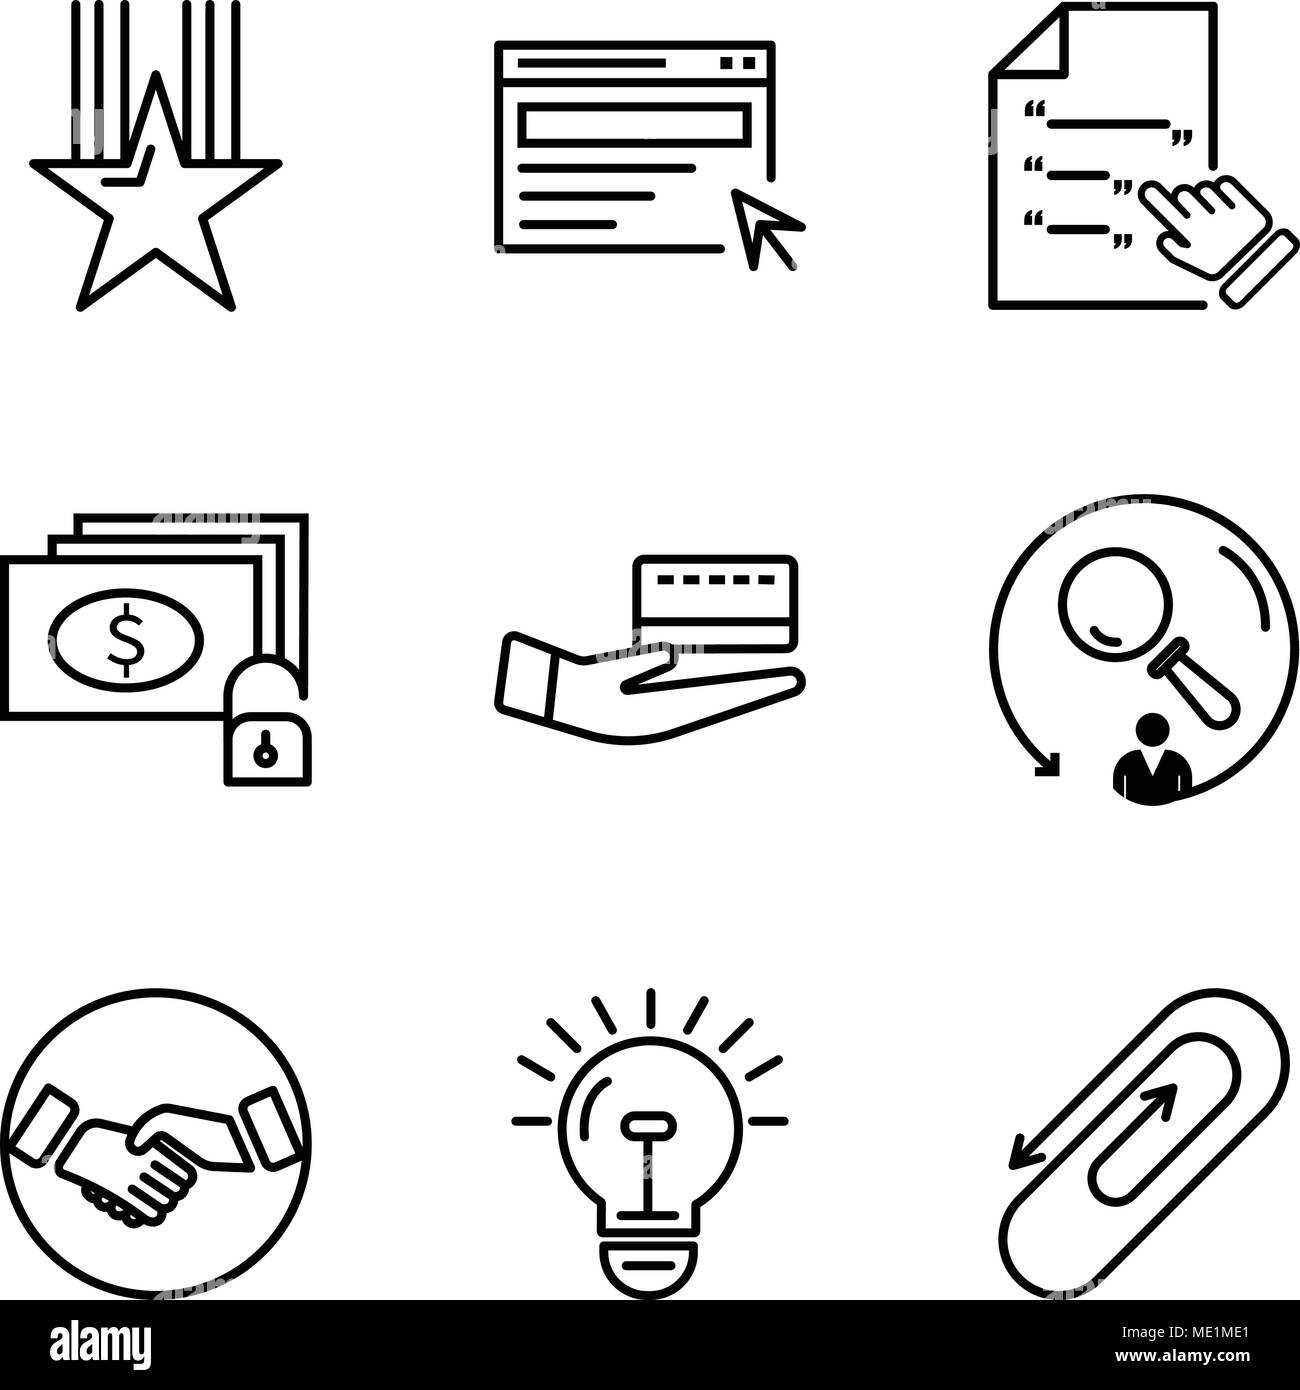 Set Of 9 simple editable icons such as clip, bulb, hand shaking, searching, card, money and key, Contract, search, star, can be used for mobile, web U Stock Vector